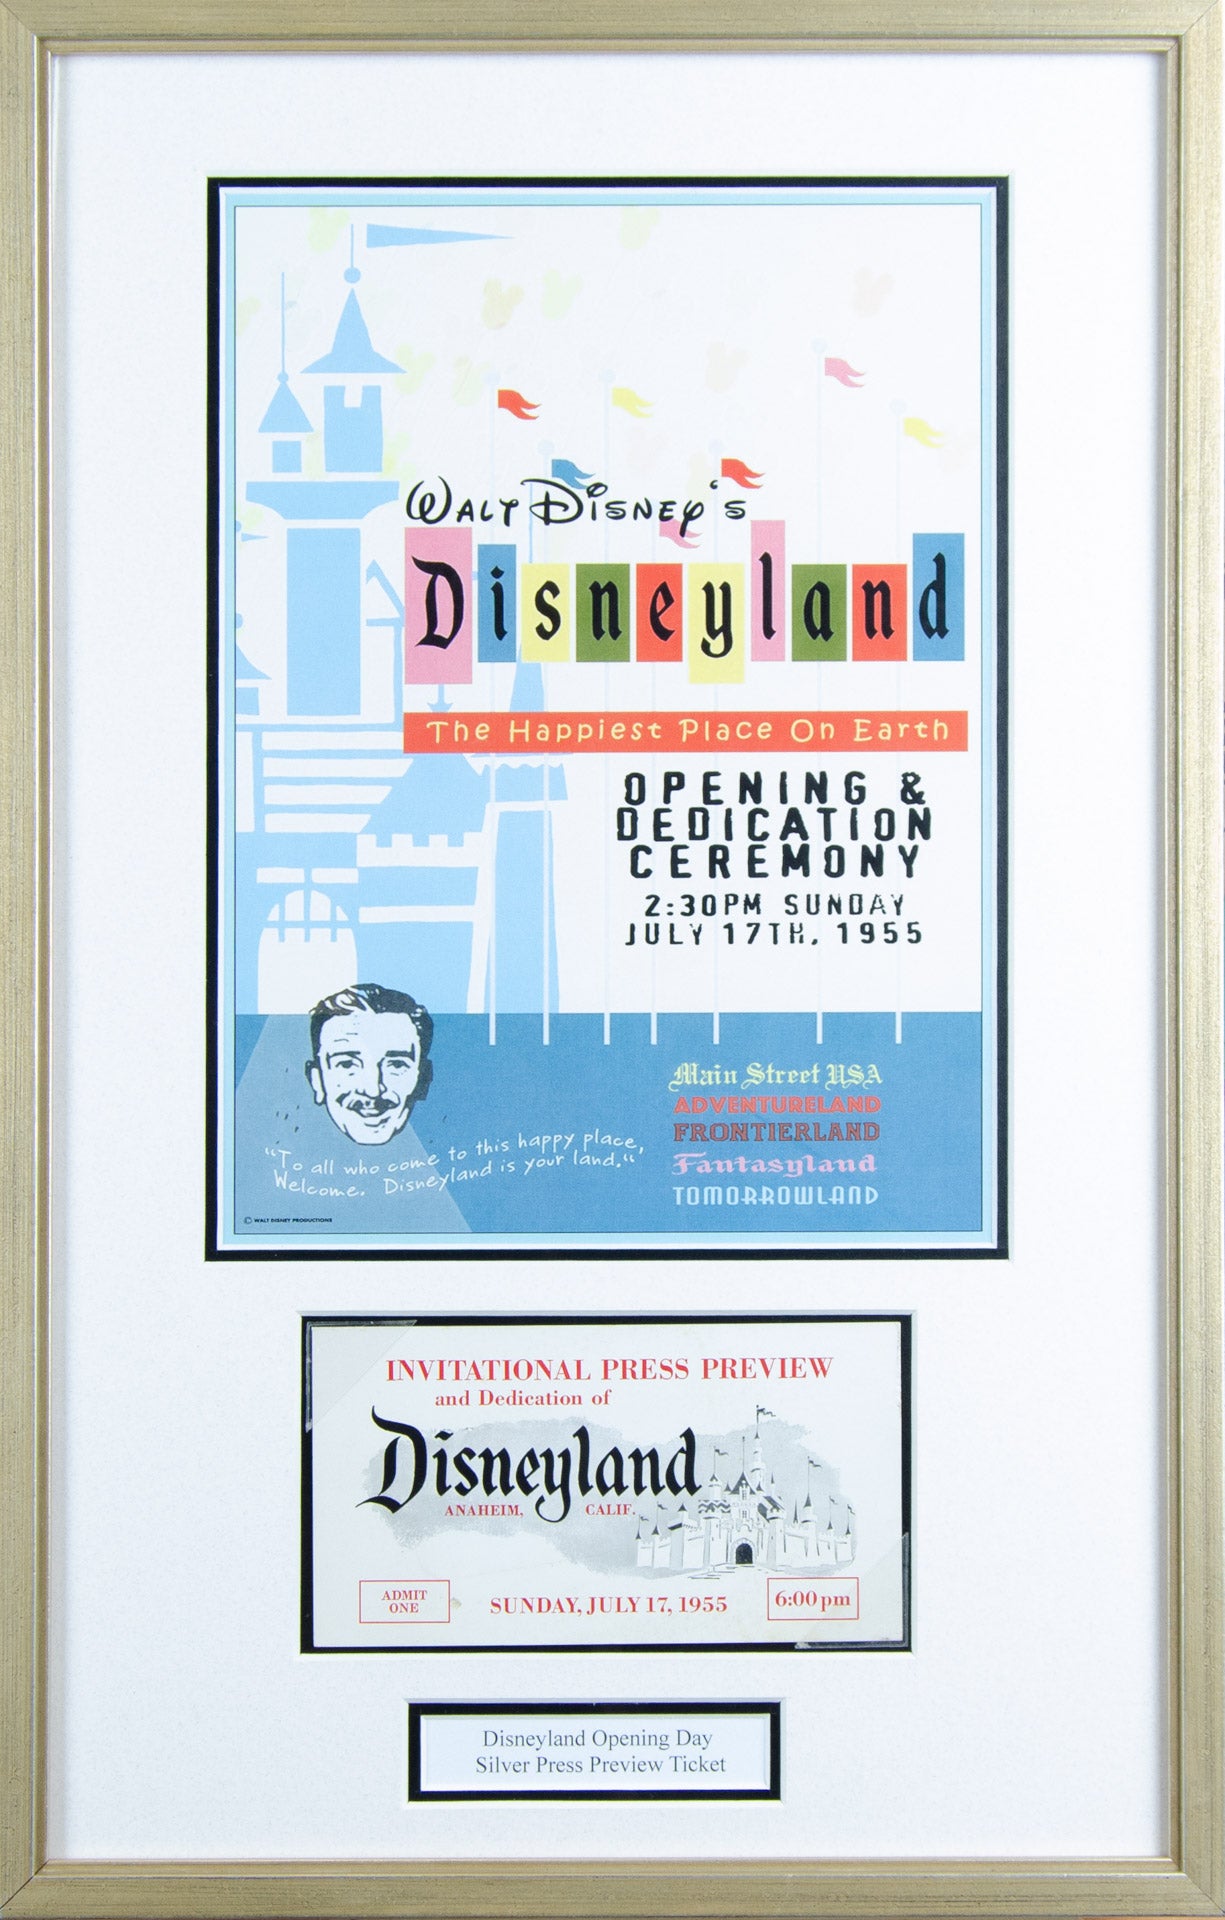 Disneyland Opening Day Press Preview Ticket